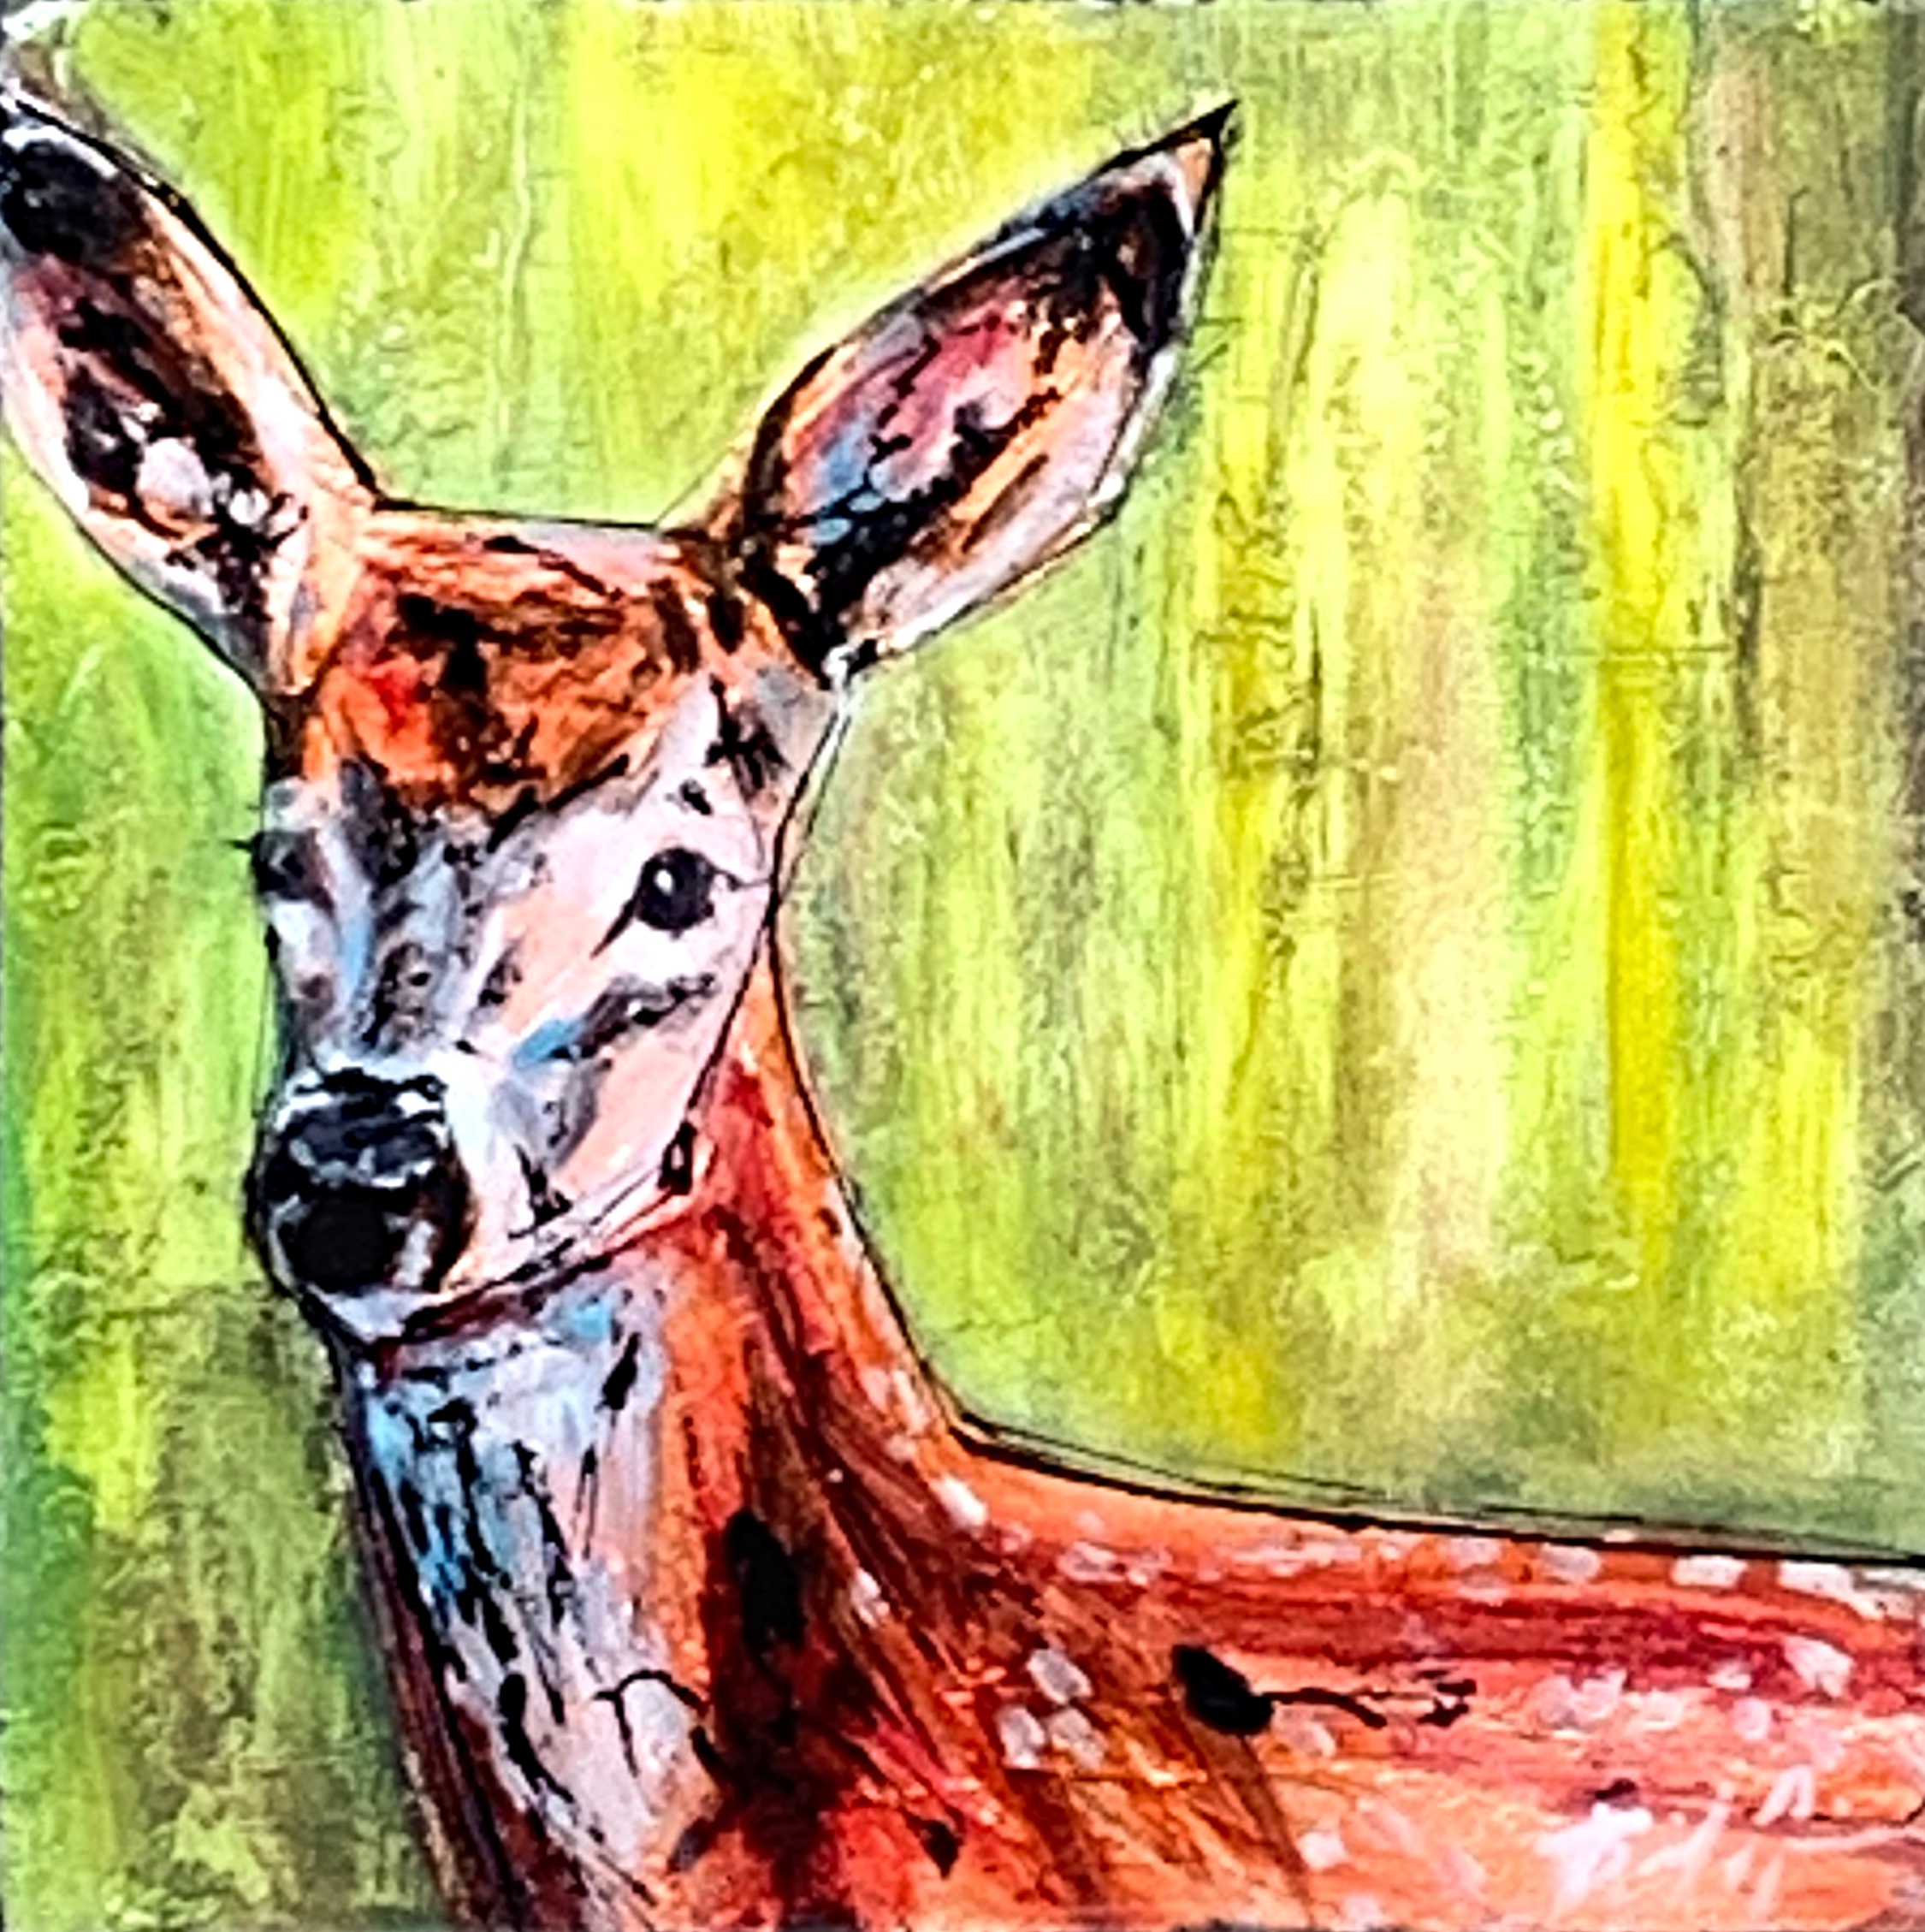 Lost Again, mixed media fawn painting by David Zimmerman | Effusion Art Gallery +  Cast Glass Studio, Invermere BC